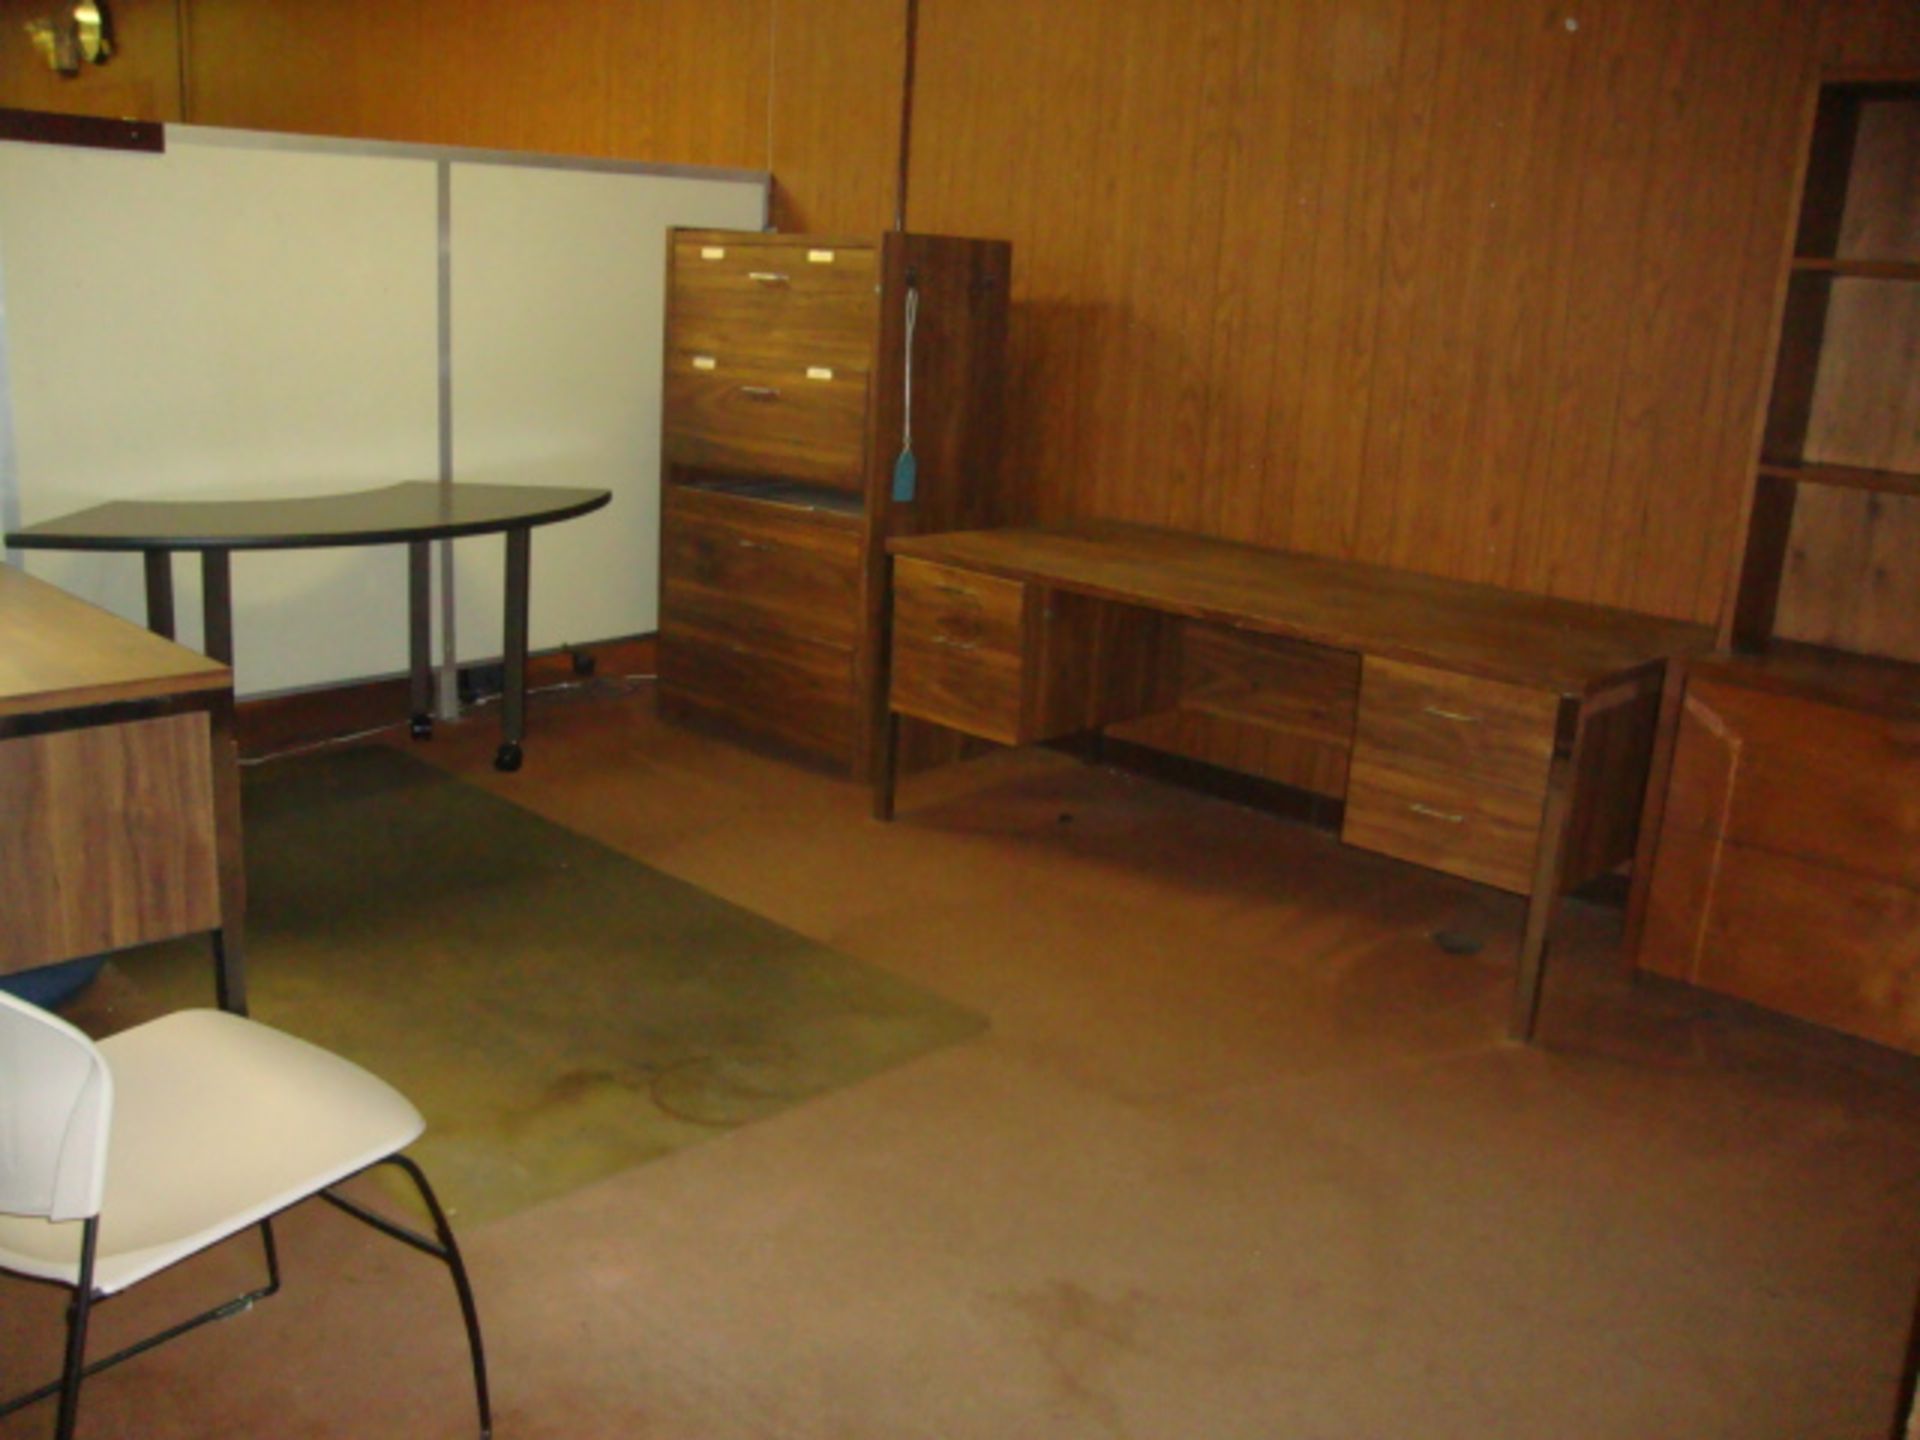 LOT OF OFFICE FURNITURE: desk, cabinets, partitions - Image 4 of 4